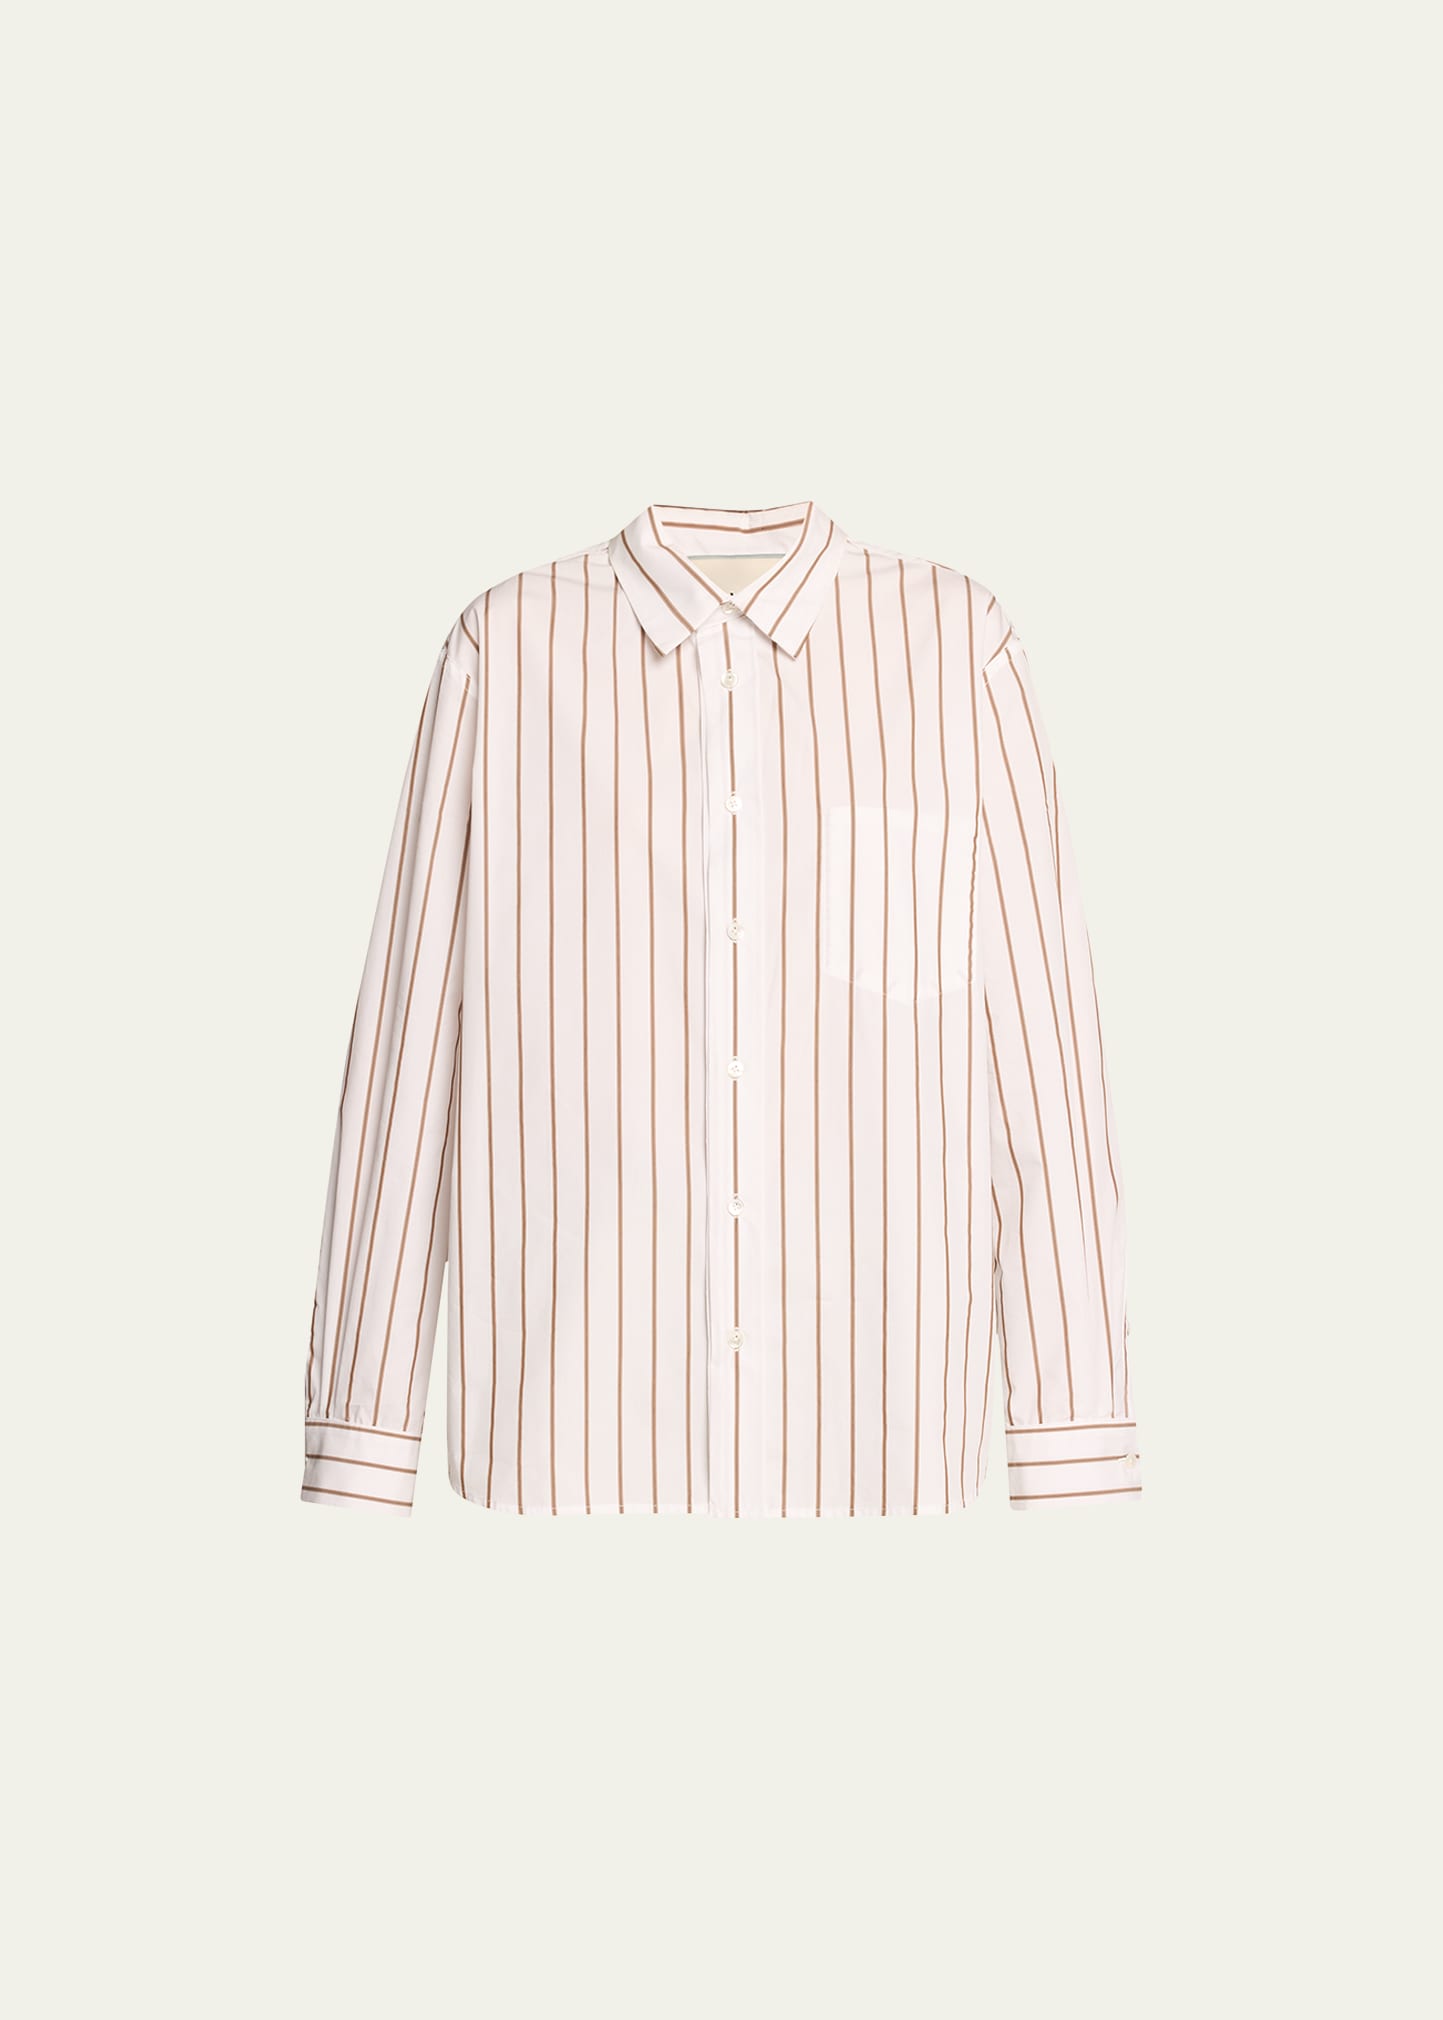 We-ar4 Inside Out Striped Shirt In White Multi